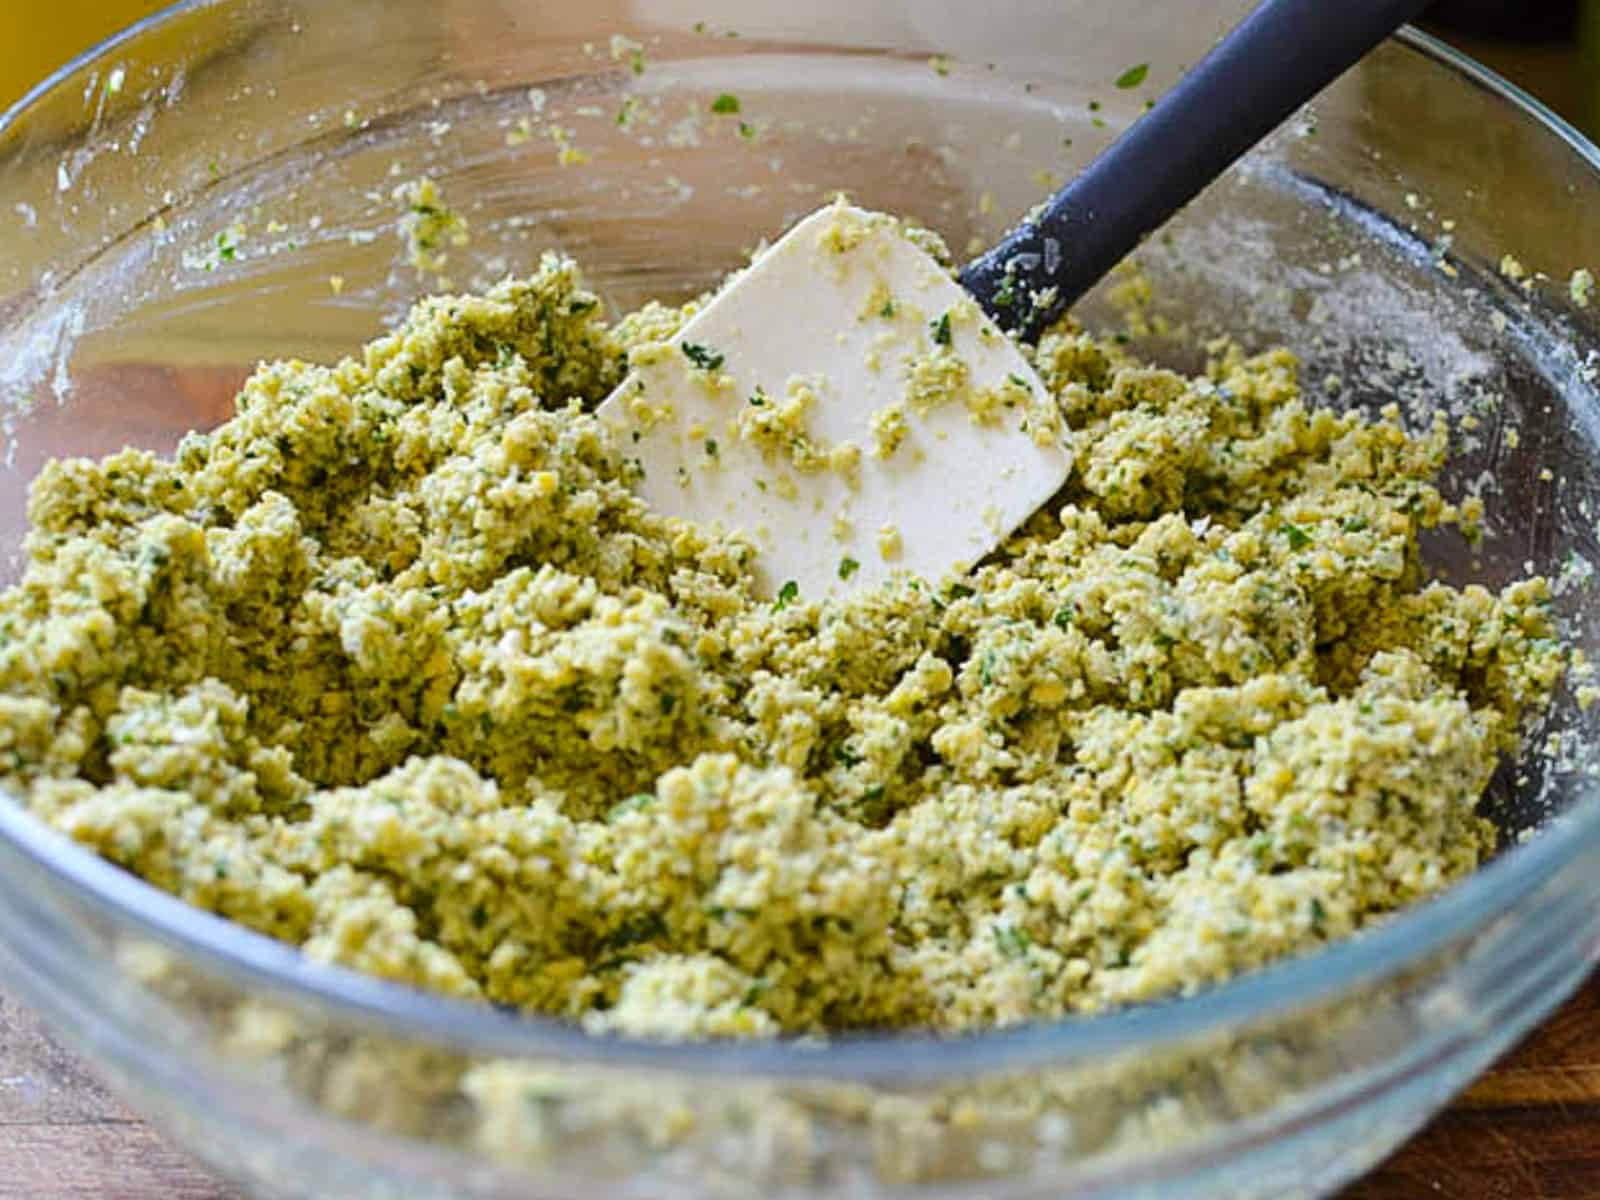 In the same food processor, add the herbs, garlic, onion and spices and pulse until there are no large pieces left. Add the herb mixture to the ground chickpeas along with the four, baking powder and baking soda and stir to combine.